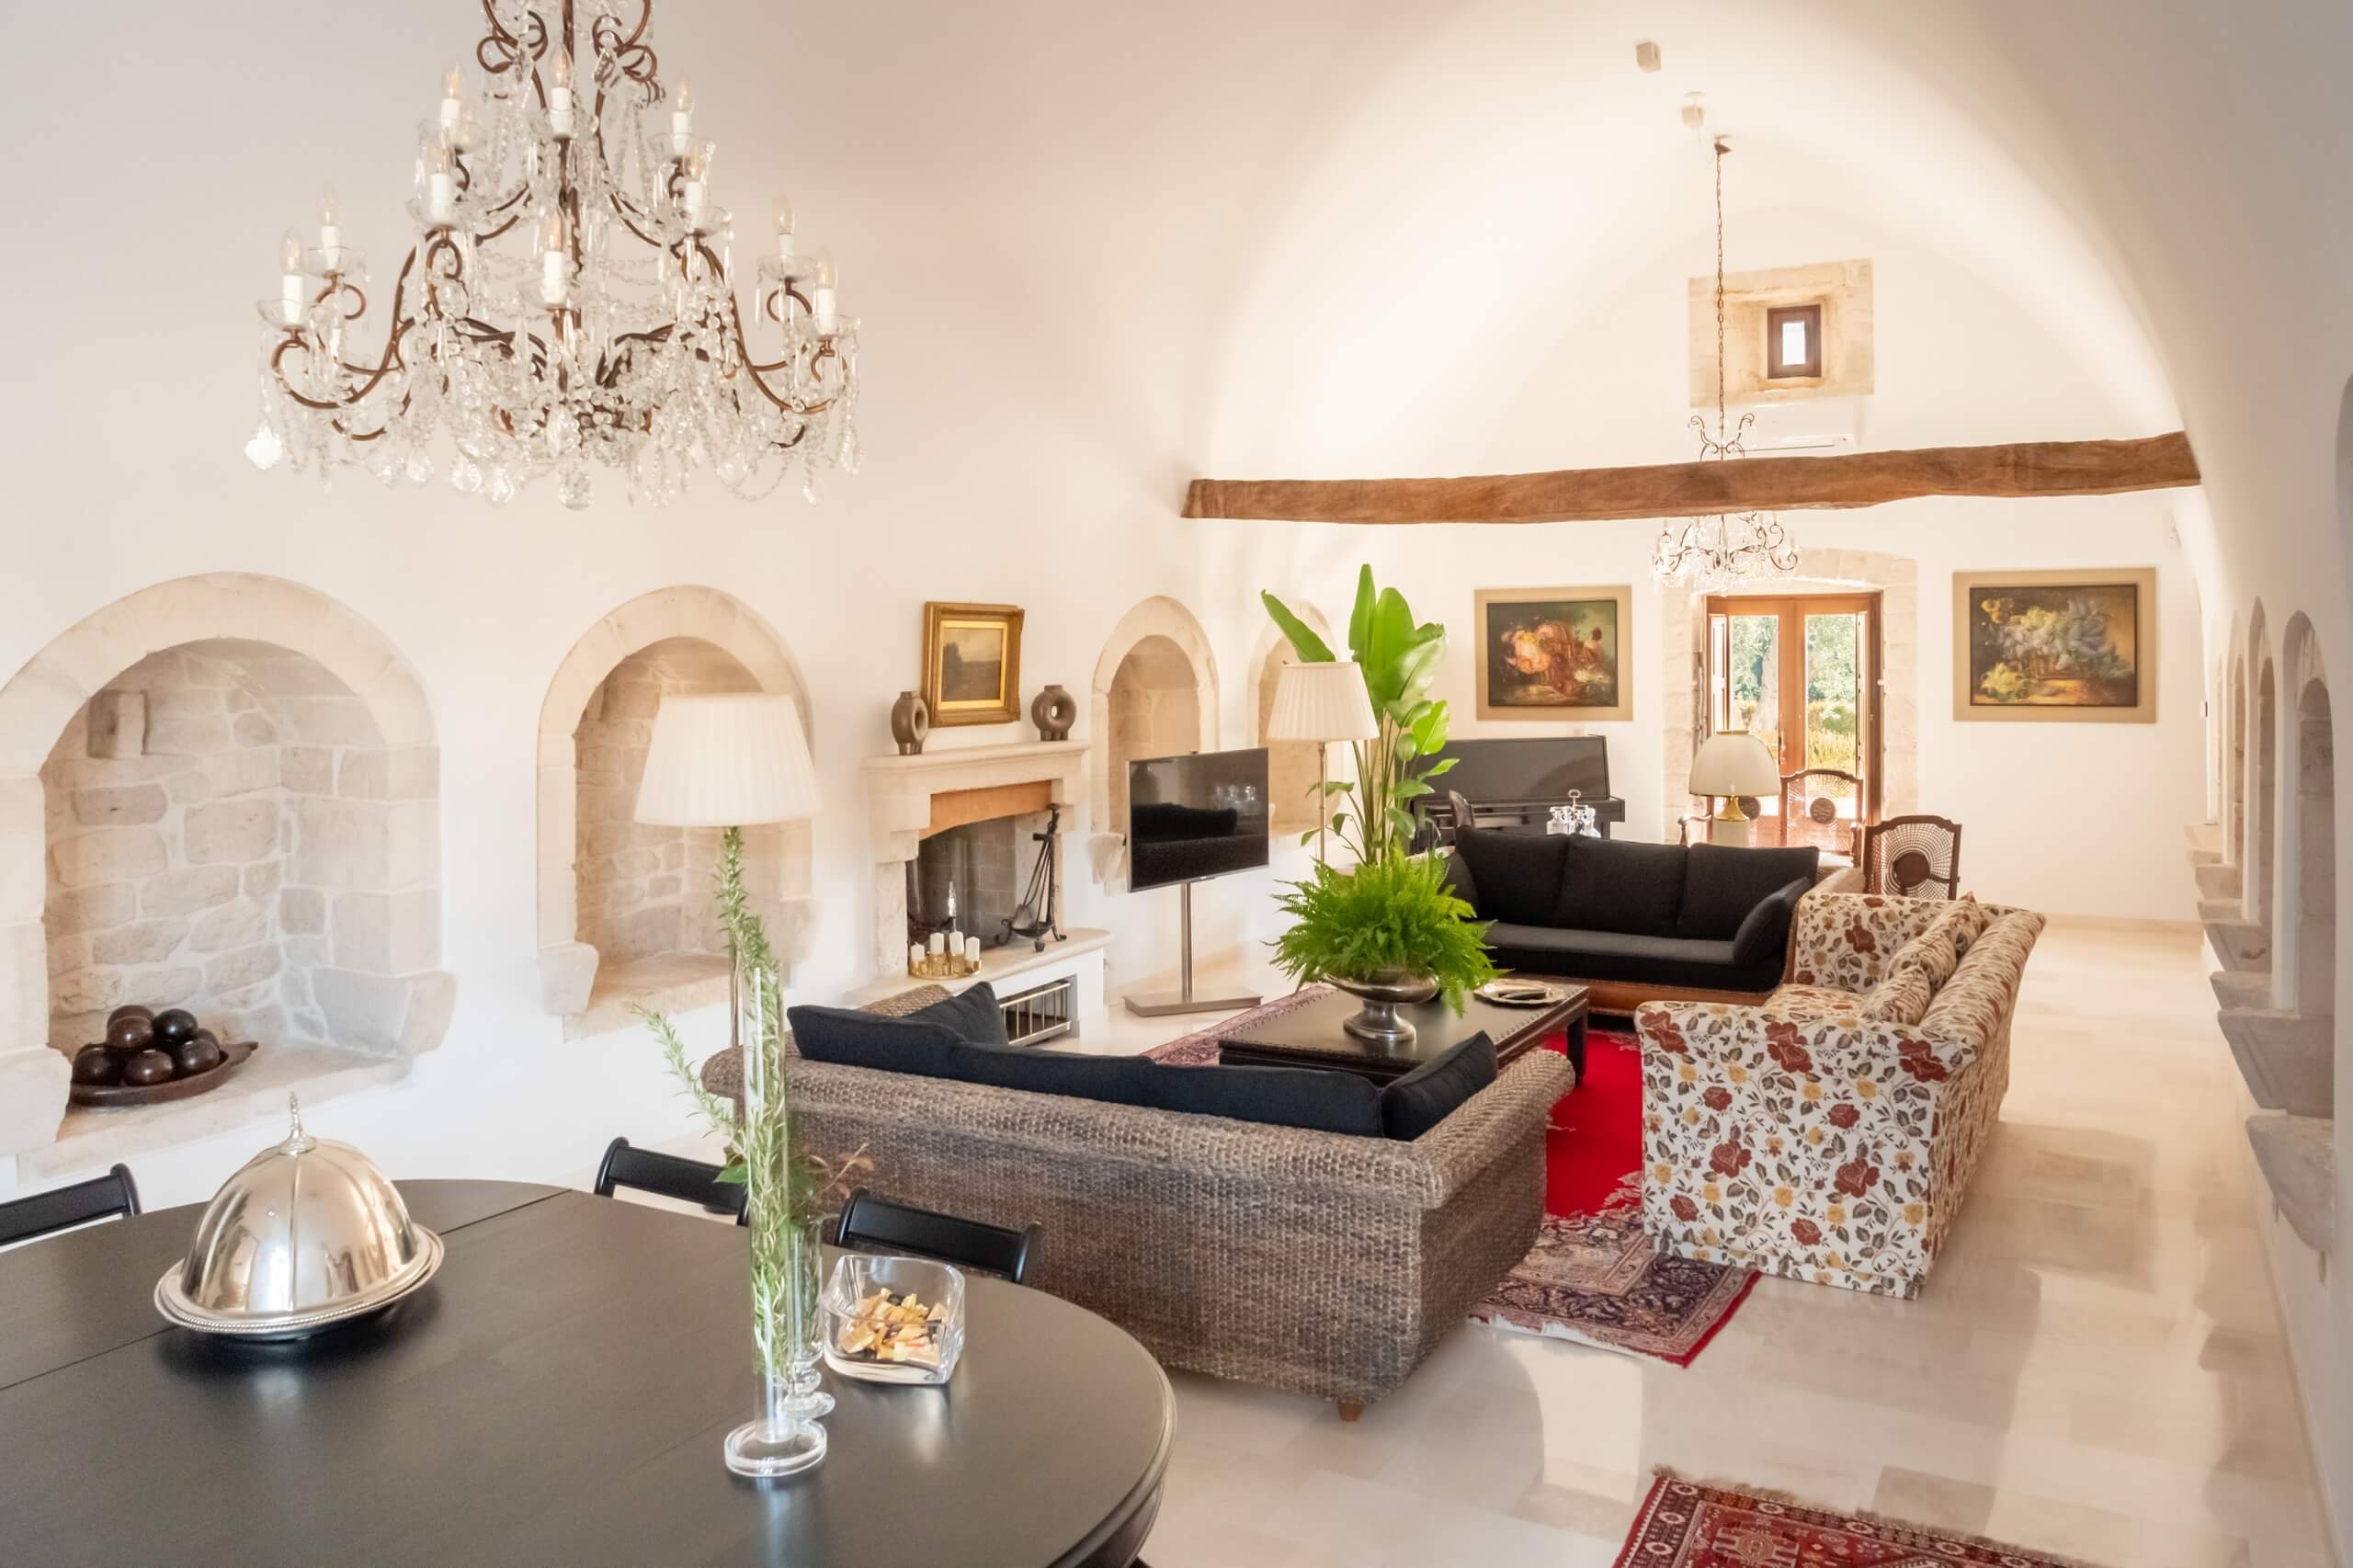 Historic farmhouse with restored stable that becomes an elegant lounge for conviviality | Masseria della Croce